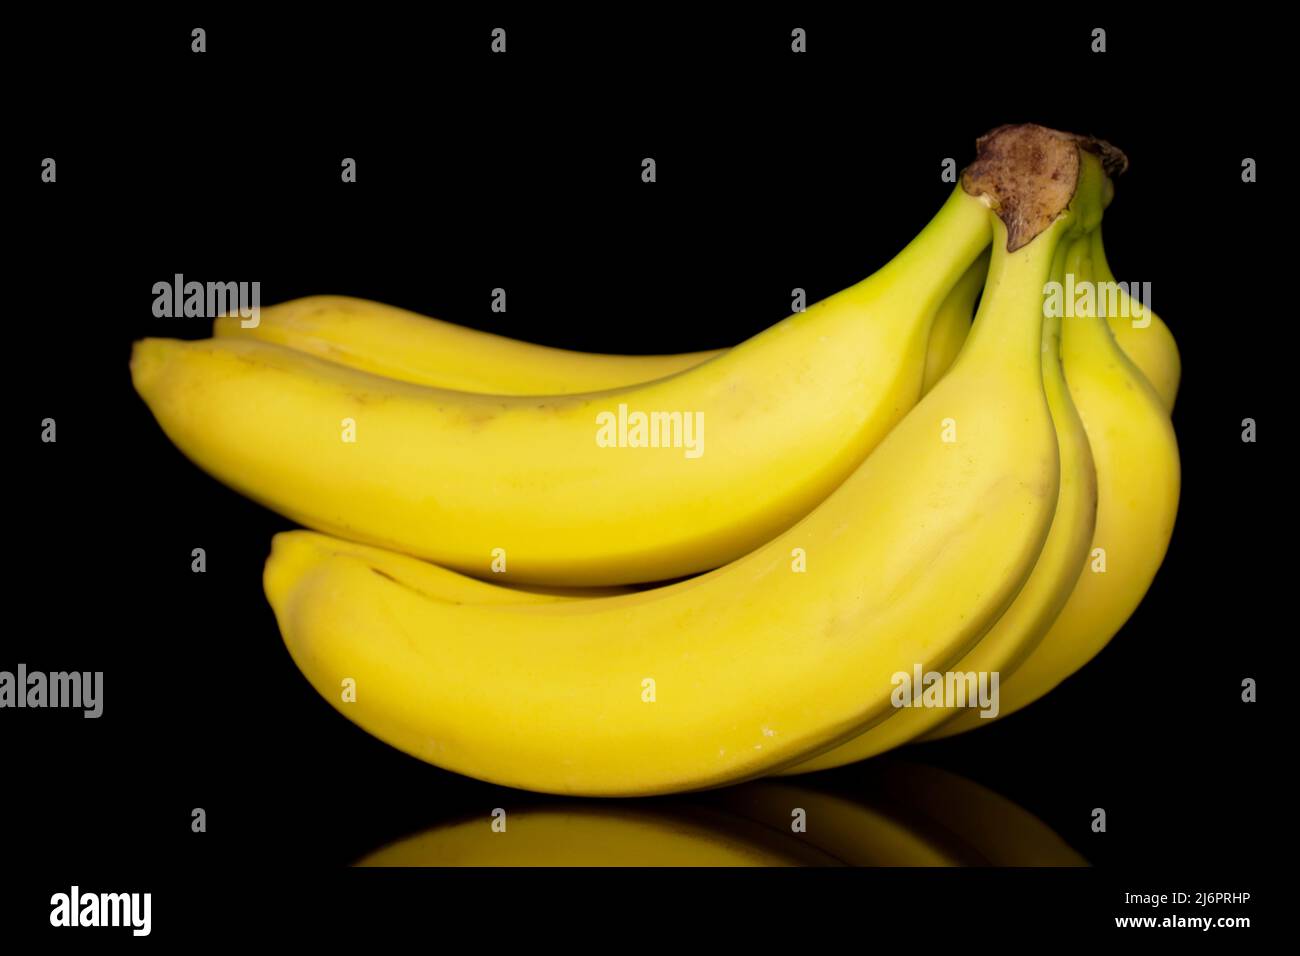 https://c8.alamy.com/comp/2J6PRHP/one-ripe-bunch-of-bananas-close-up-isolated-on-a-black-background-2J6PRHP.jpg